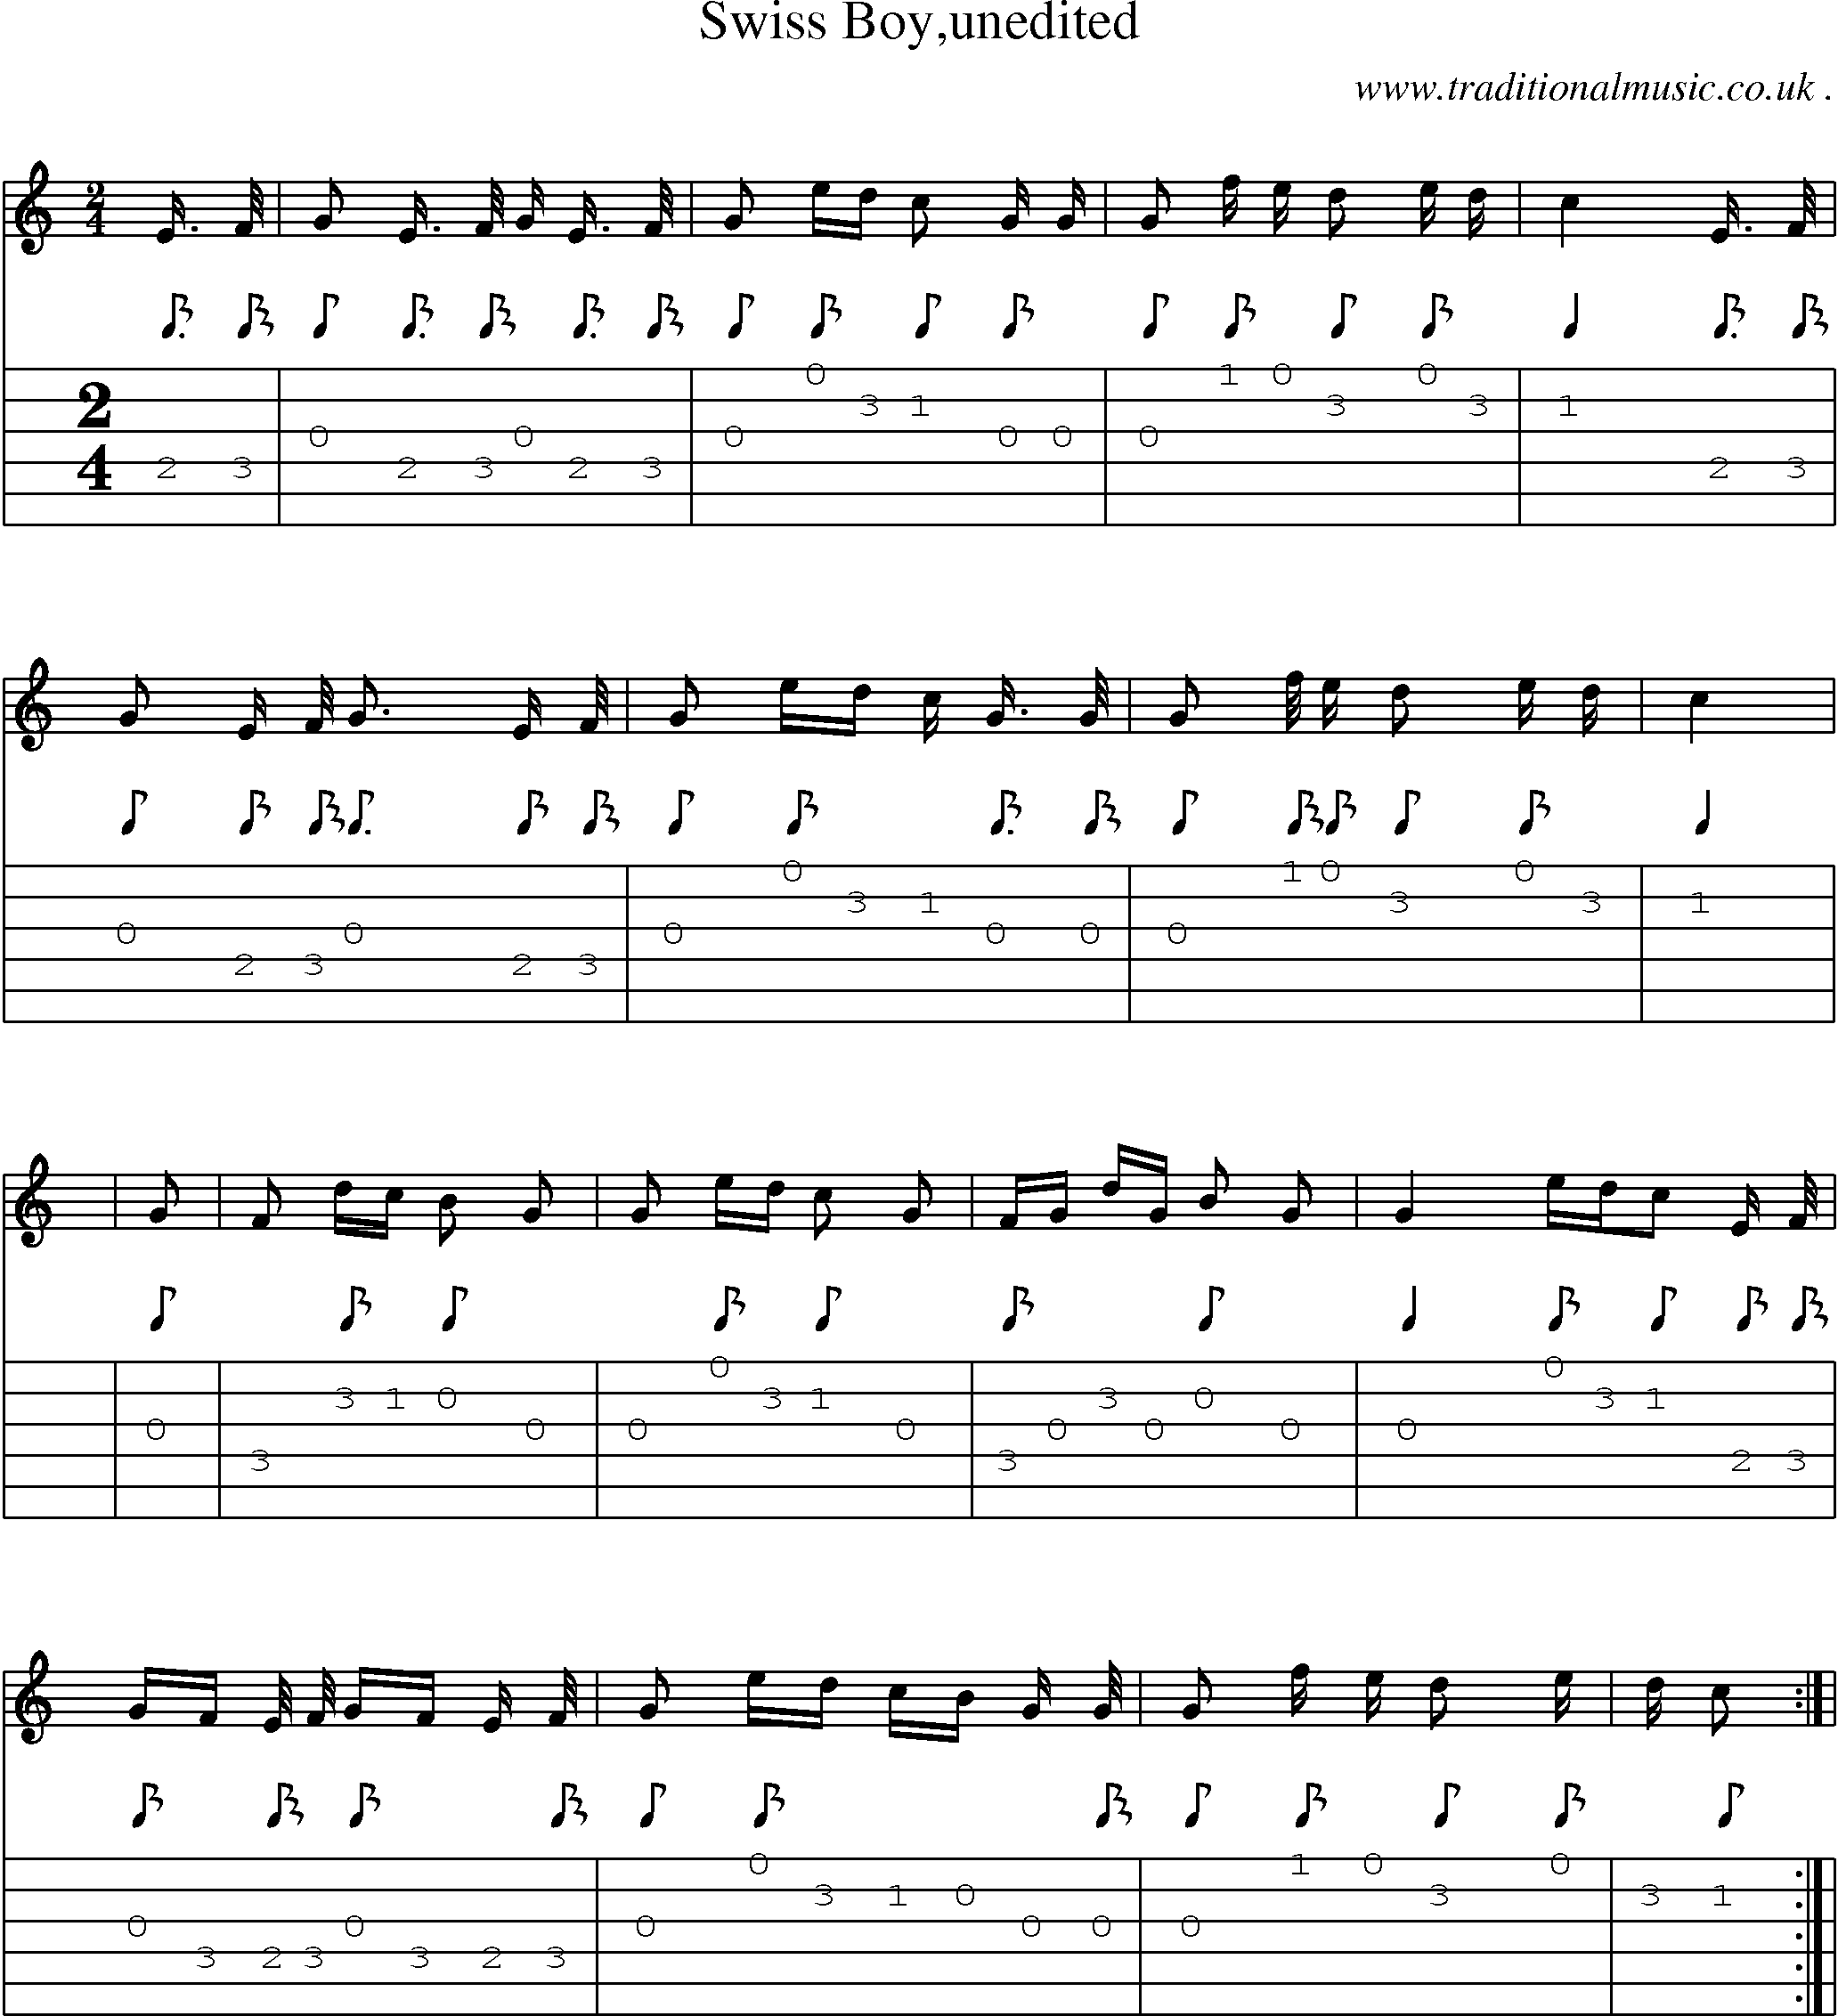 Sheet-Music and Guitar Tabs for Swiss Boyunedited